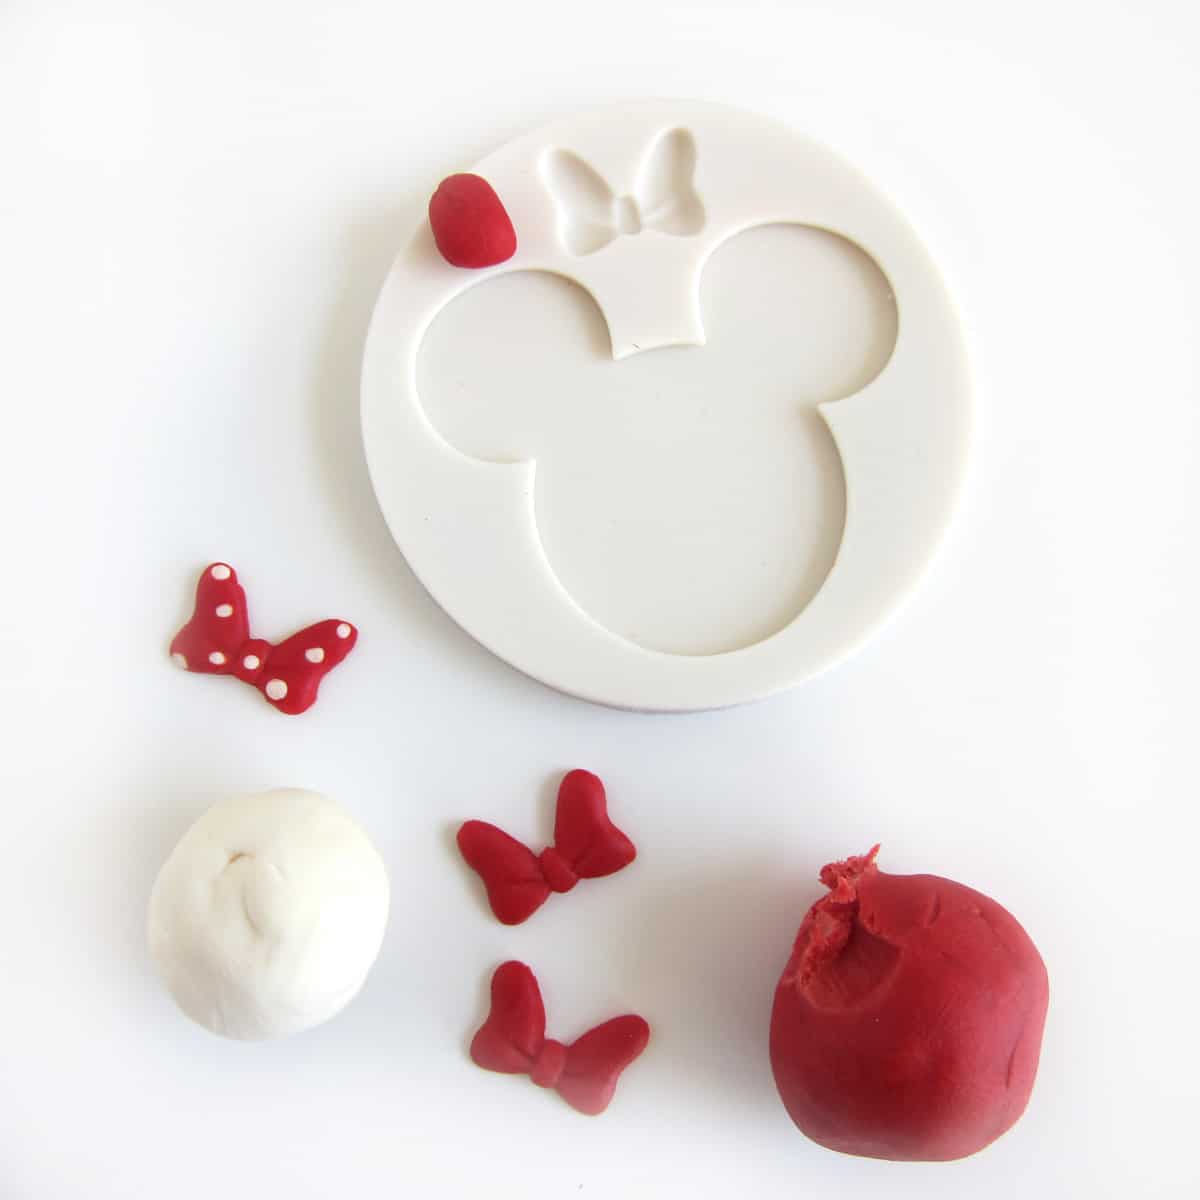 Minnie Mouse silicone mold surrounded by red and white modeling chocolate and bows